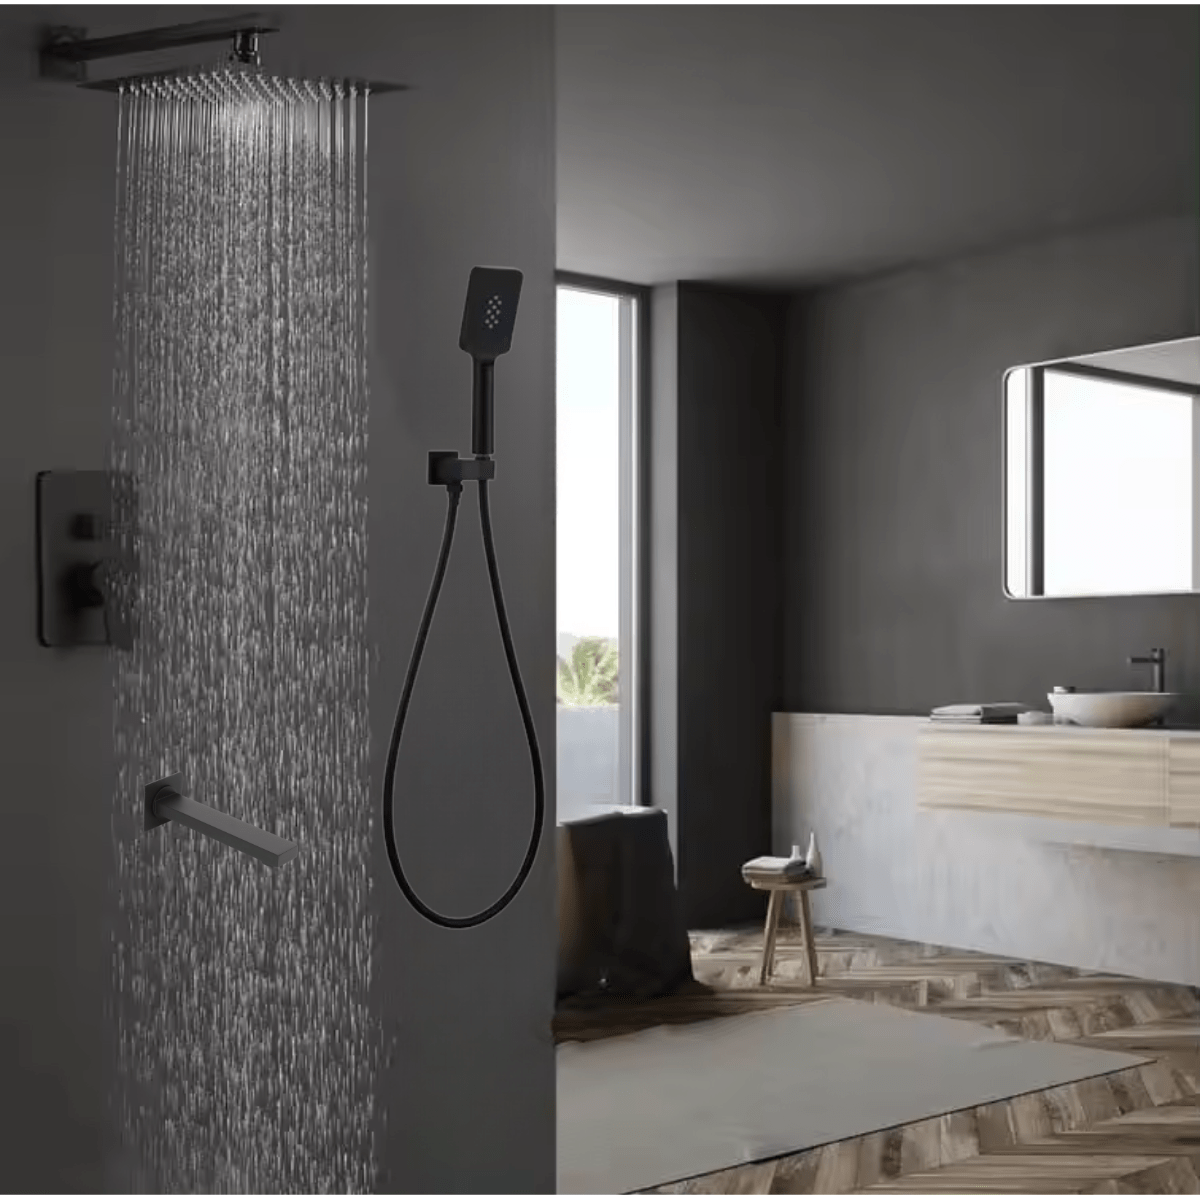 Buy Bathroom Black Concealed Wall Mounted Three-Function Square Overhead Rain Shower Set - WK-K-8417H | Shop at Supply Master Accra, Ghana Shower Set Buy Tools hardware Building materials